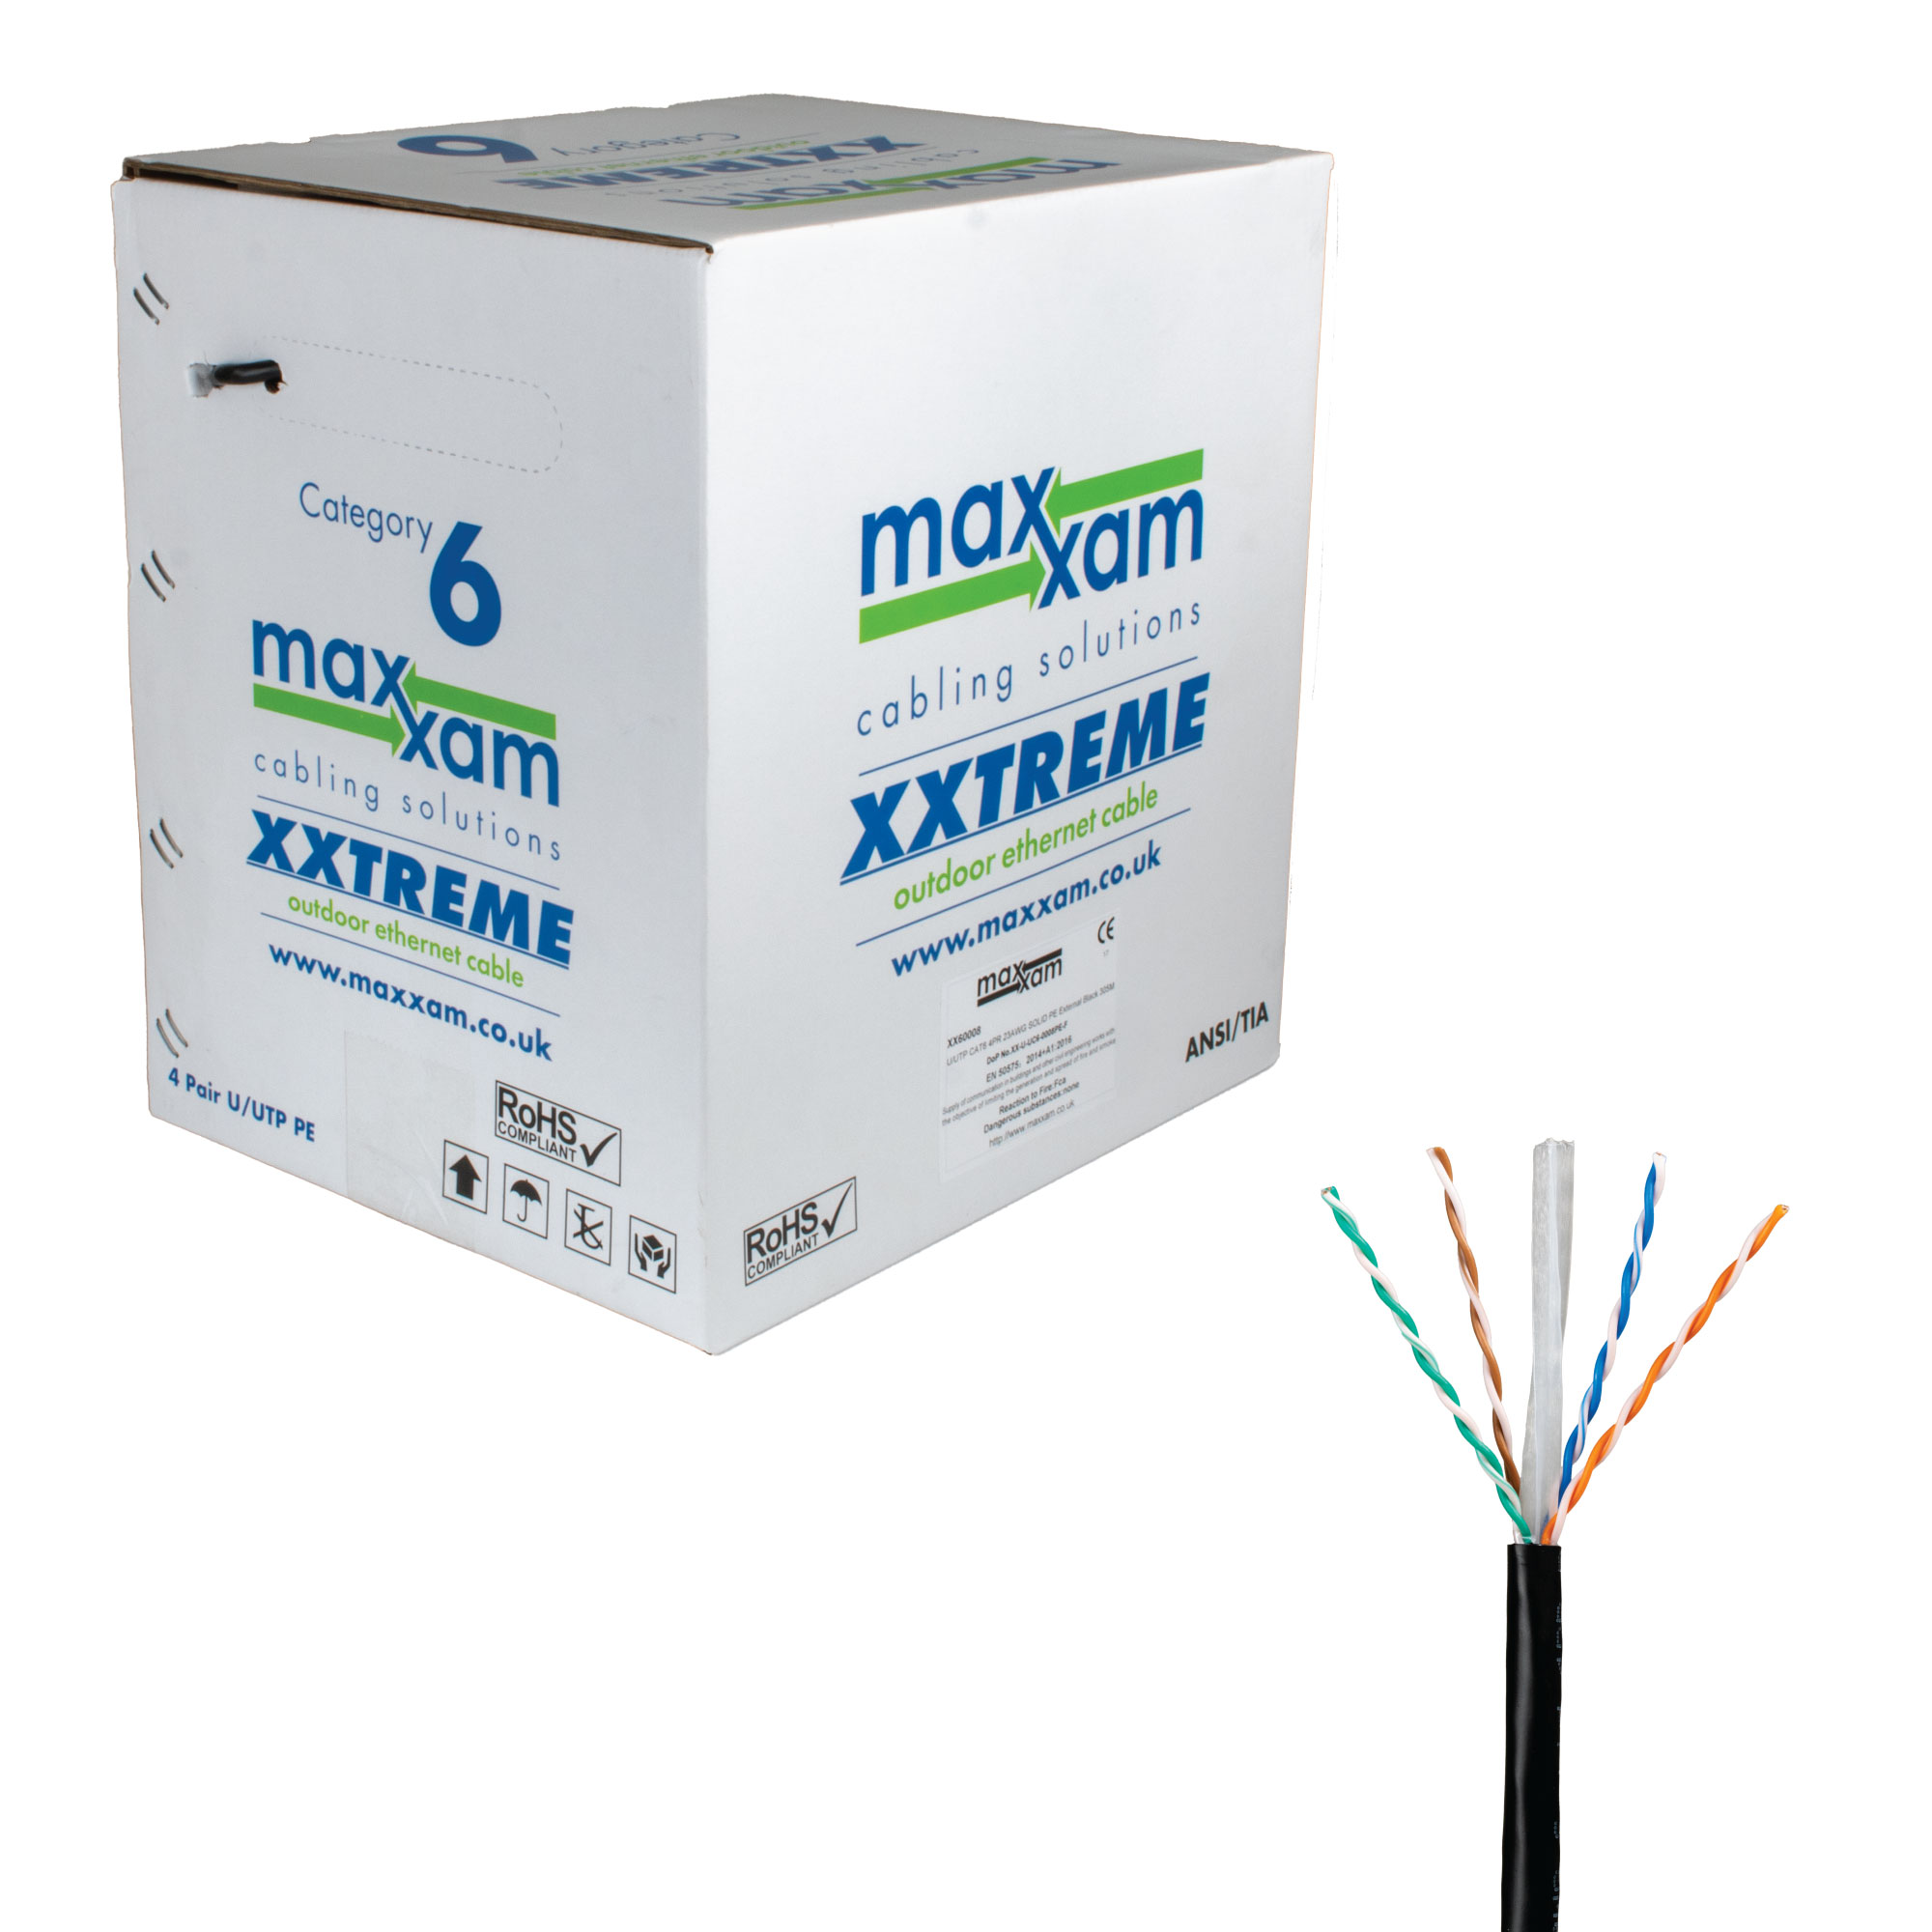 Cat6 Black U/UTP Maxxam XXtreme Outdoor 23AWG Solid Cable 305m Reel in Box